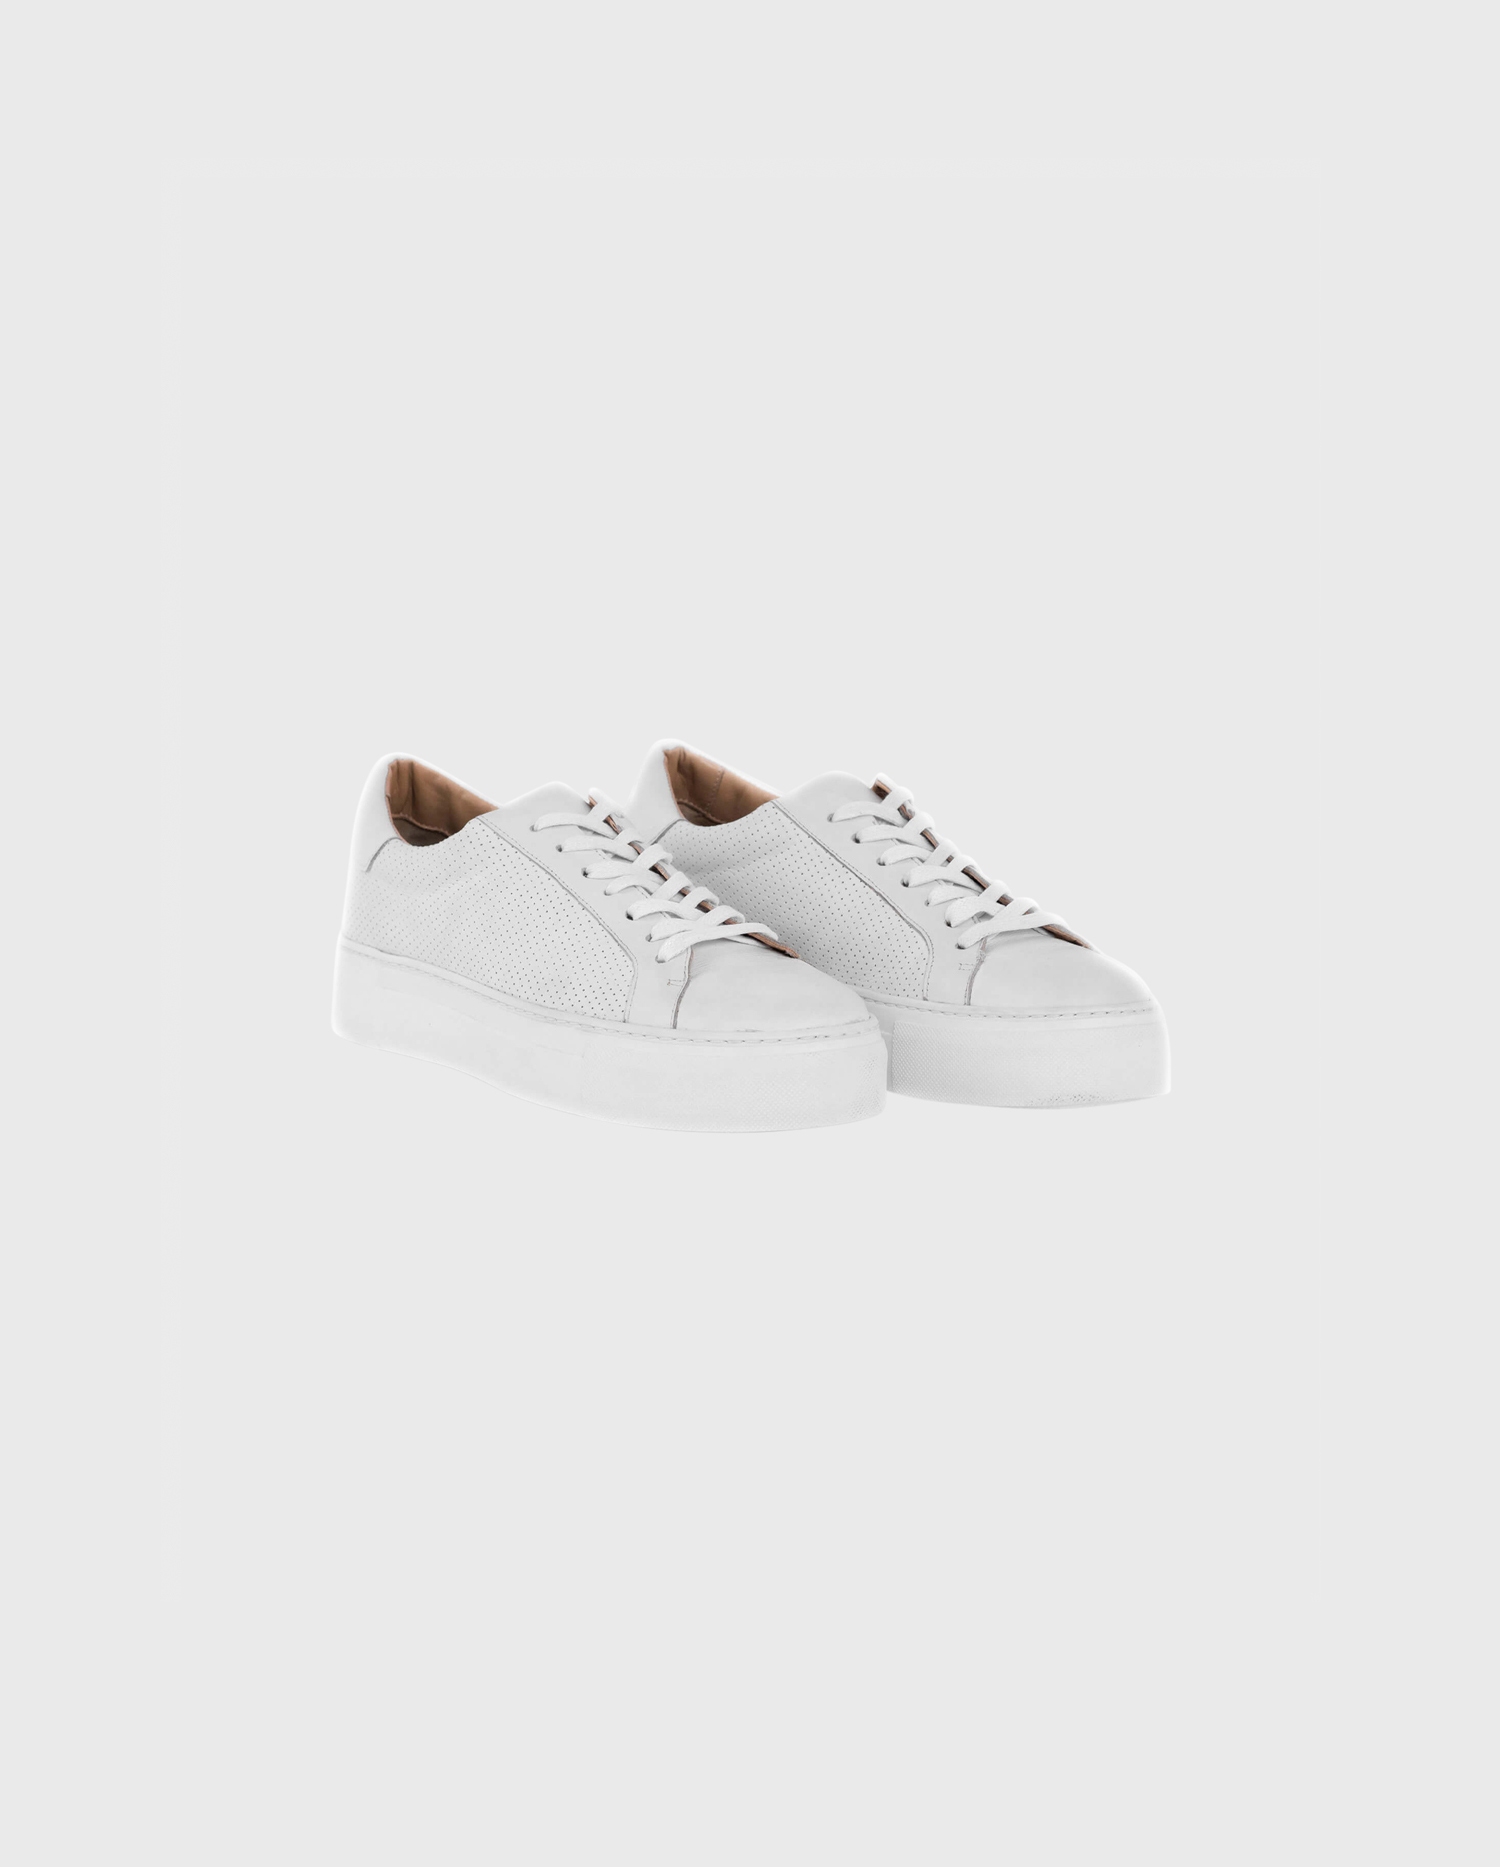 Discover the UGO white sneaker with flowers from ANNE FONTAINE